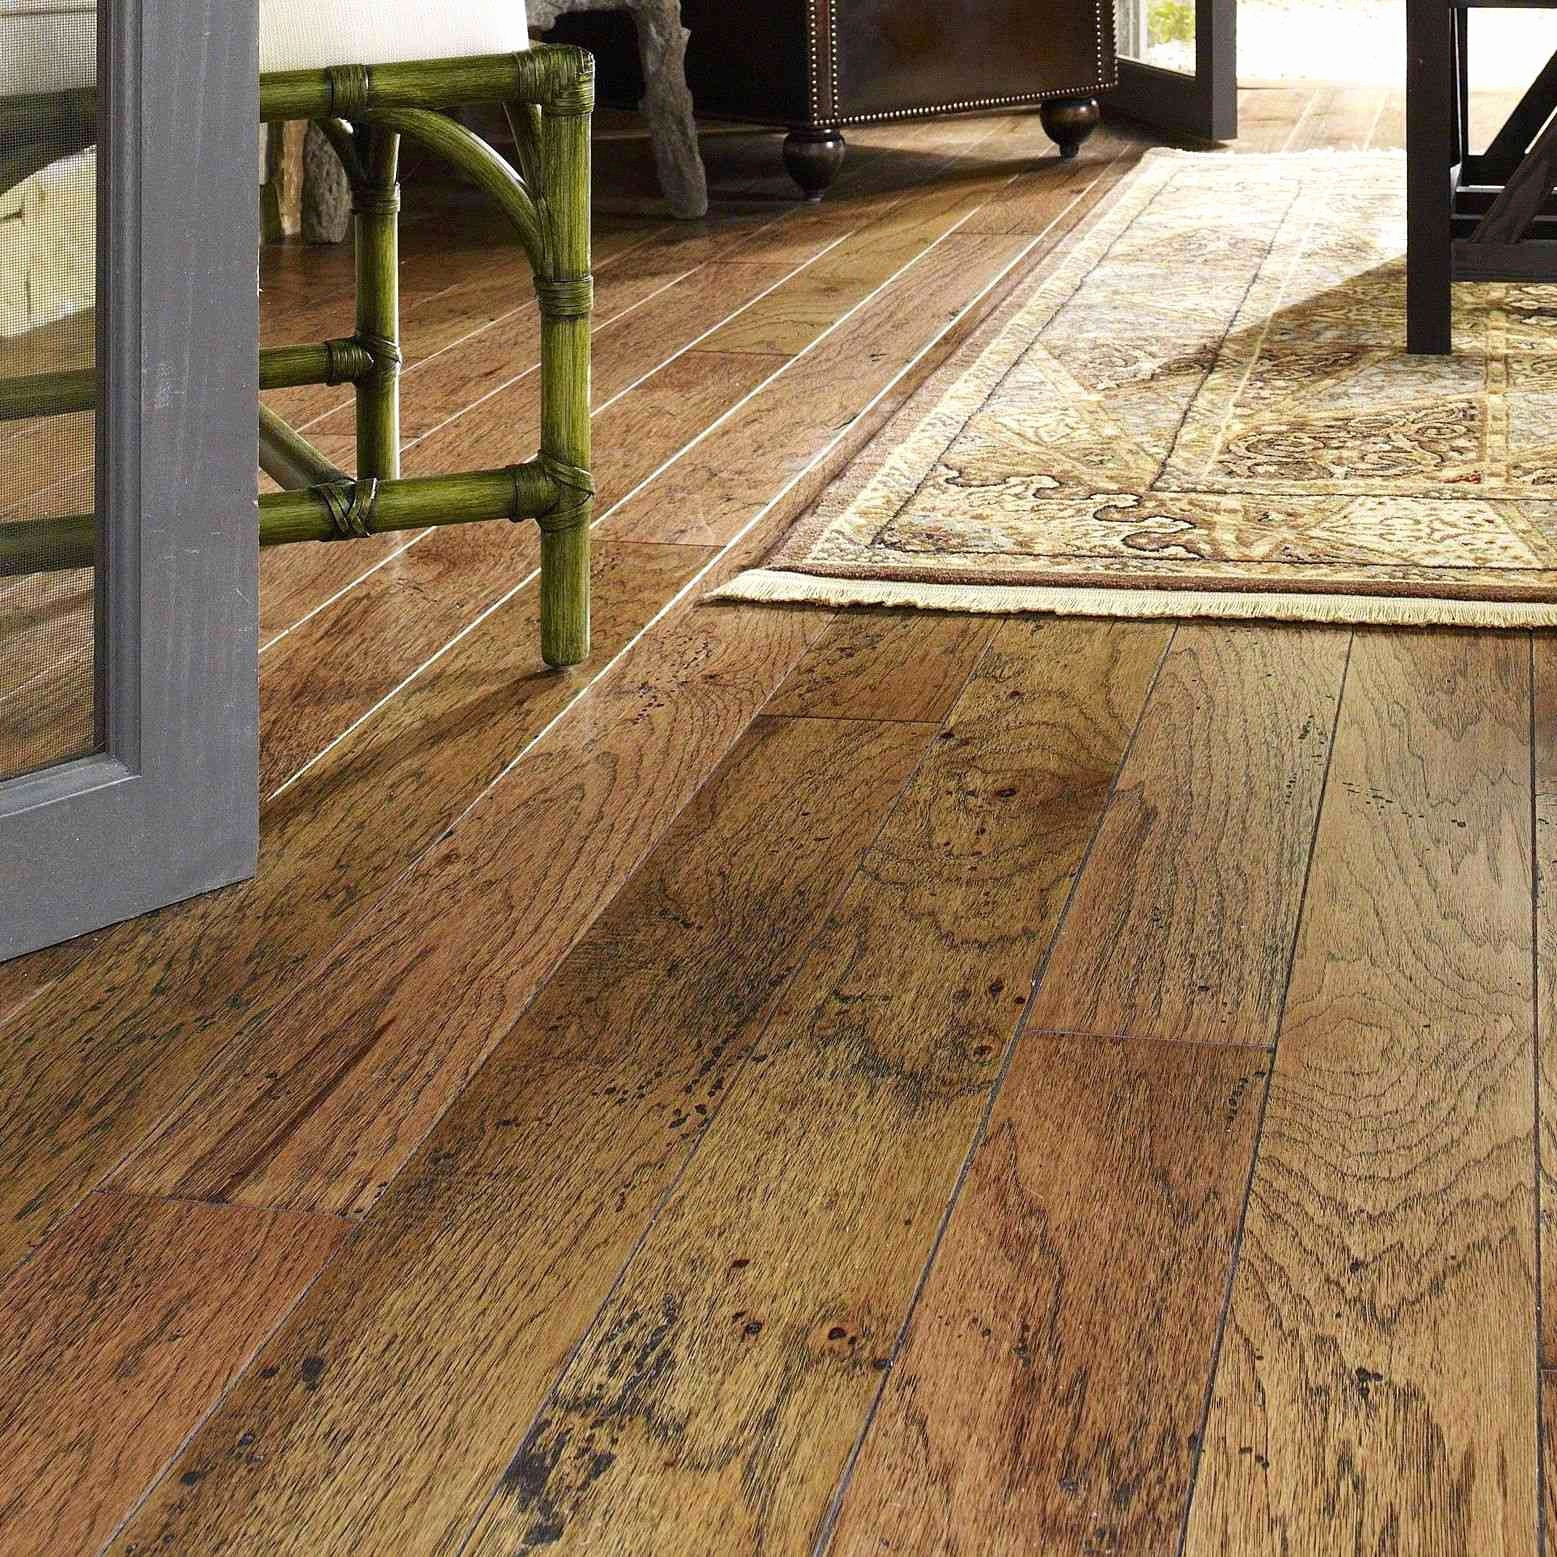 21 Stunning How to Clean Old Hardwood Floors Under Carpet 2024 free download how to clean old hardwood floors under carpet of 17 best of install hardwood floor image dizpos com pertaining to install hardwood floor fresh 50 elegant hardwood floor living room graphics 